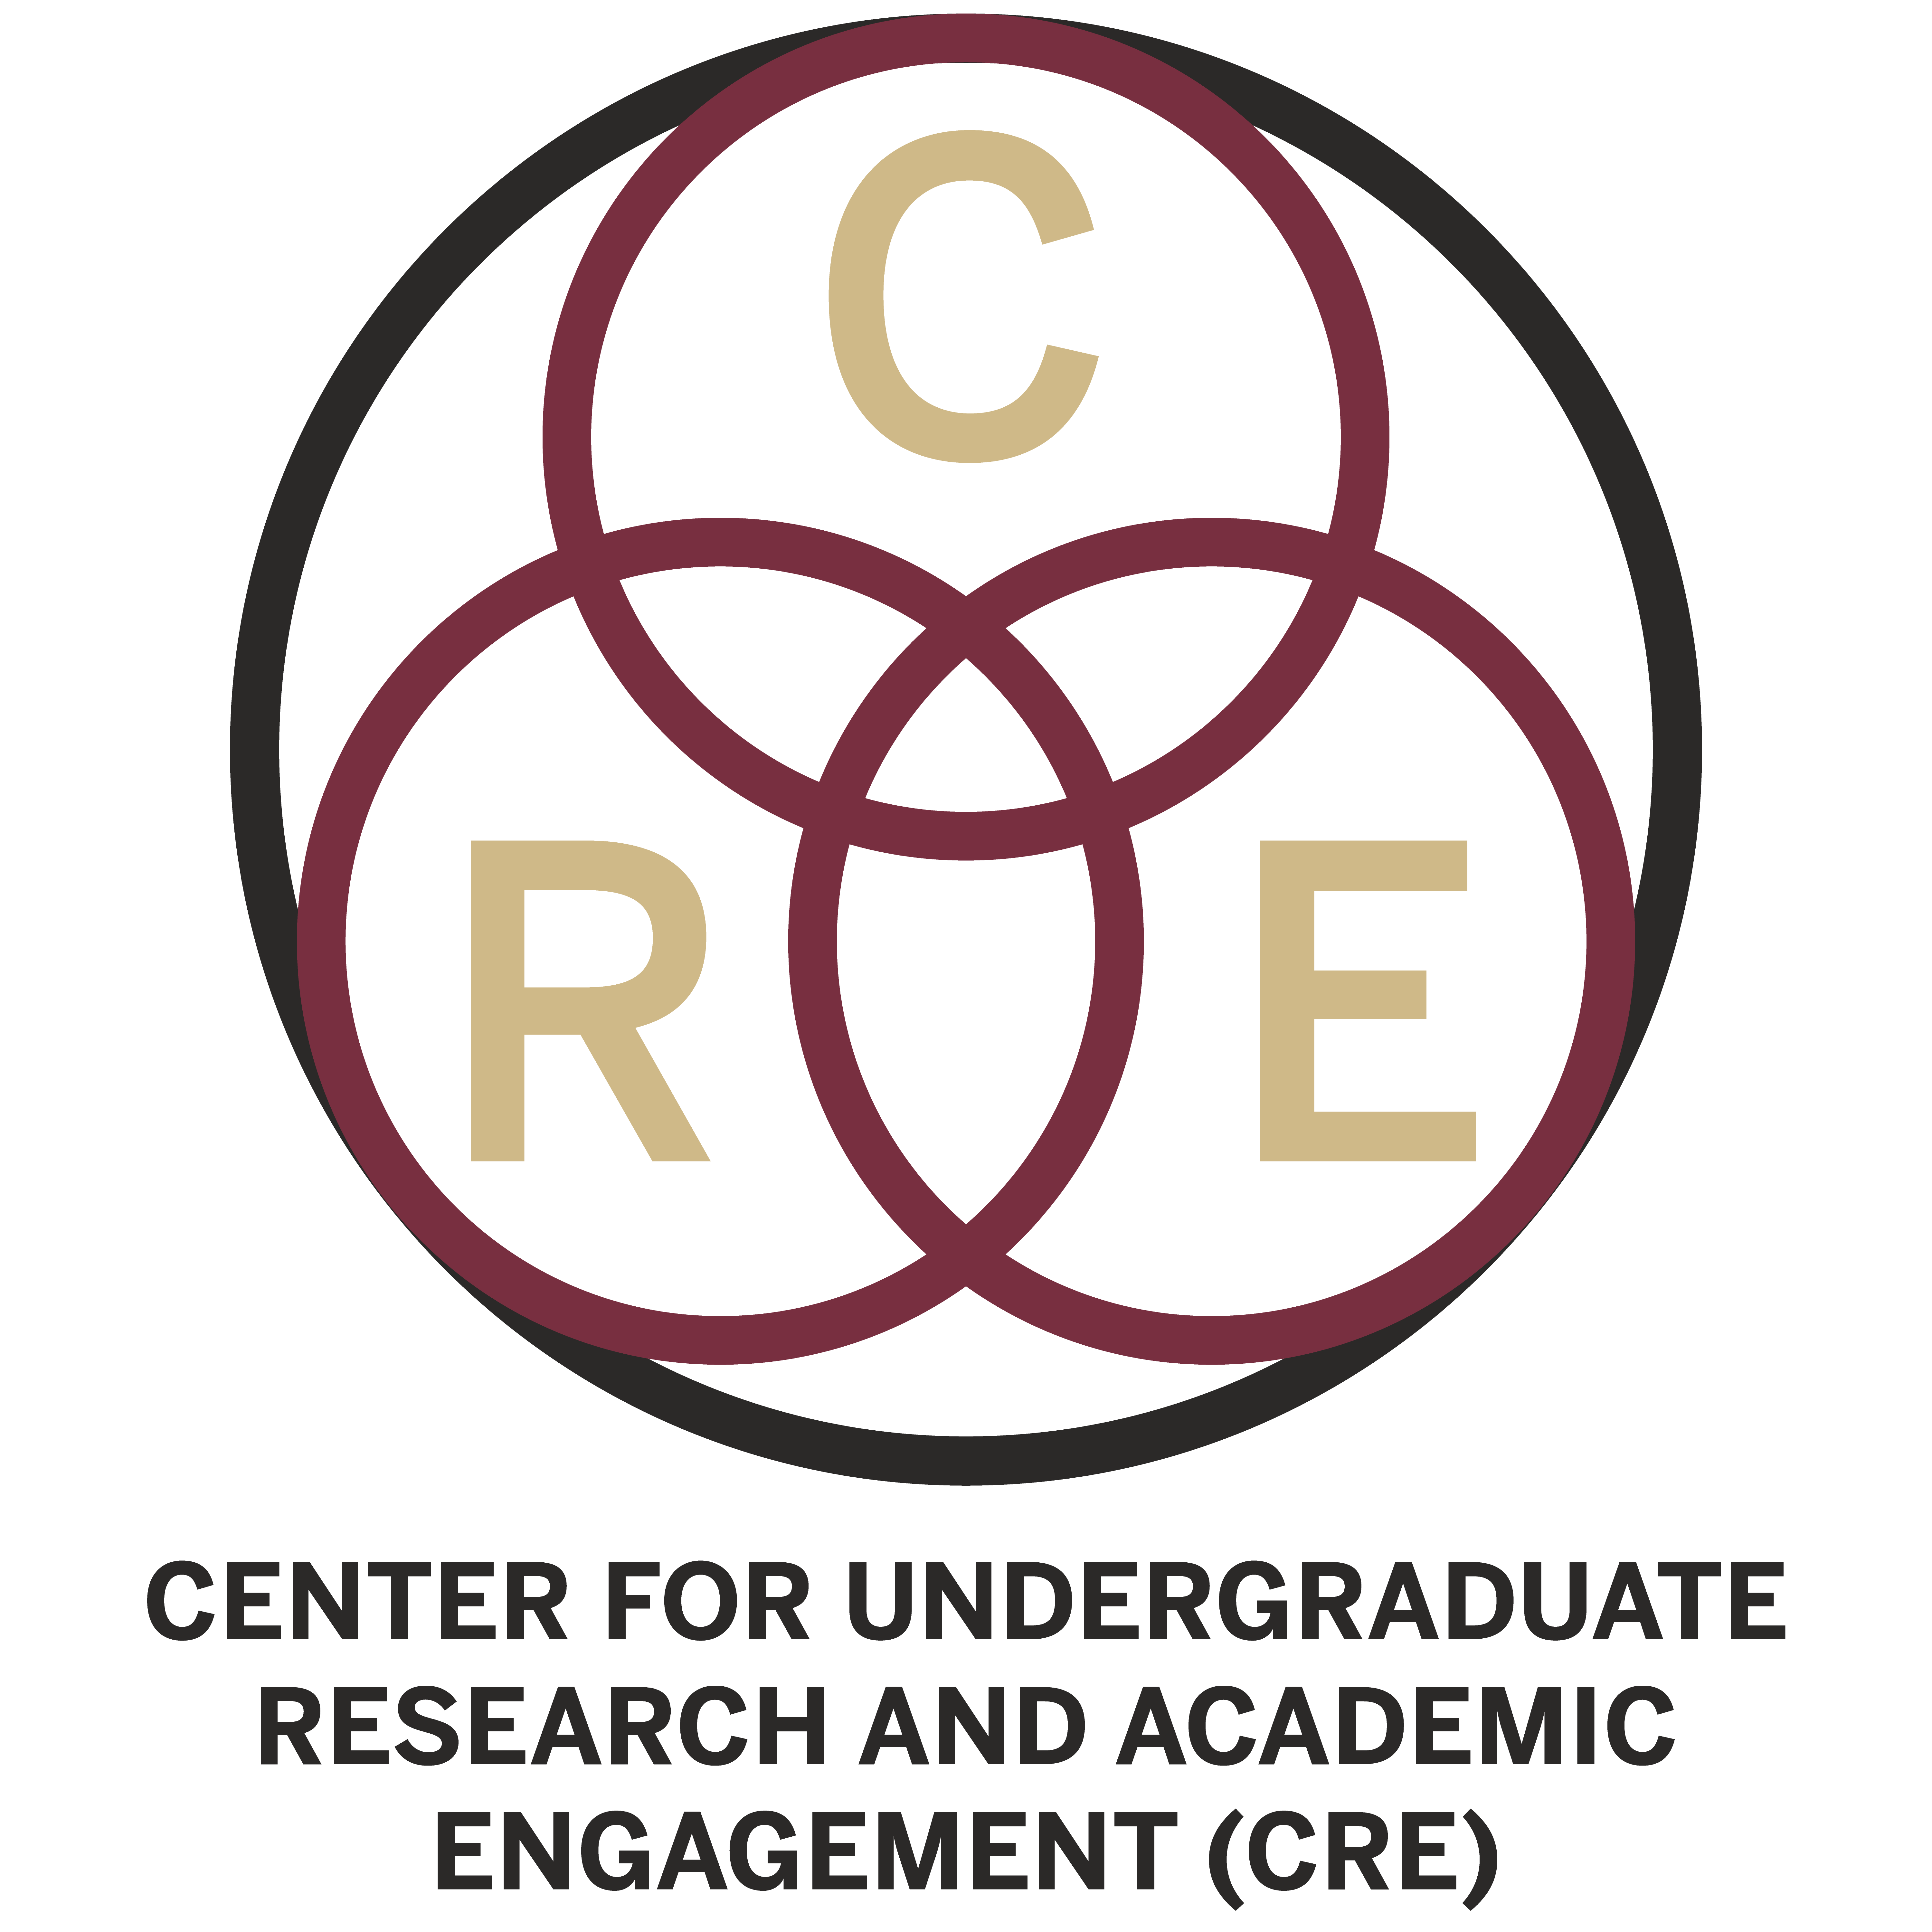 Center for Undergraduate Research and Academic Engagement logo